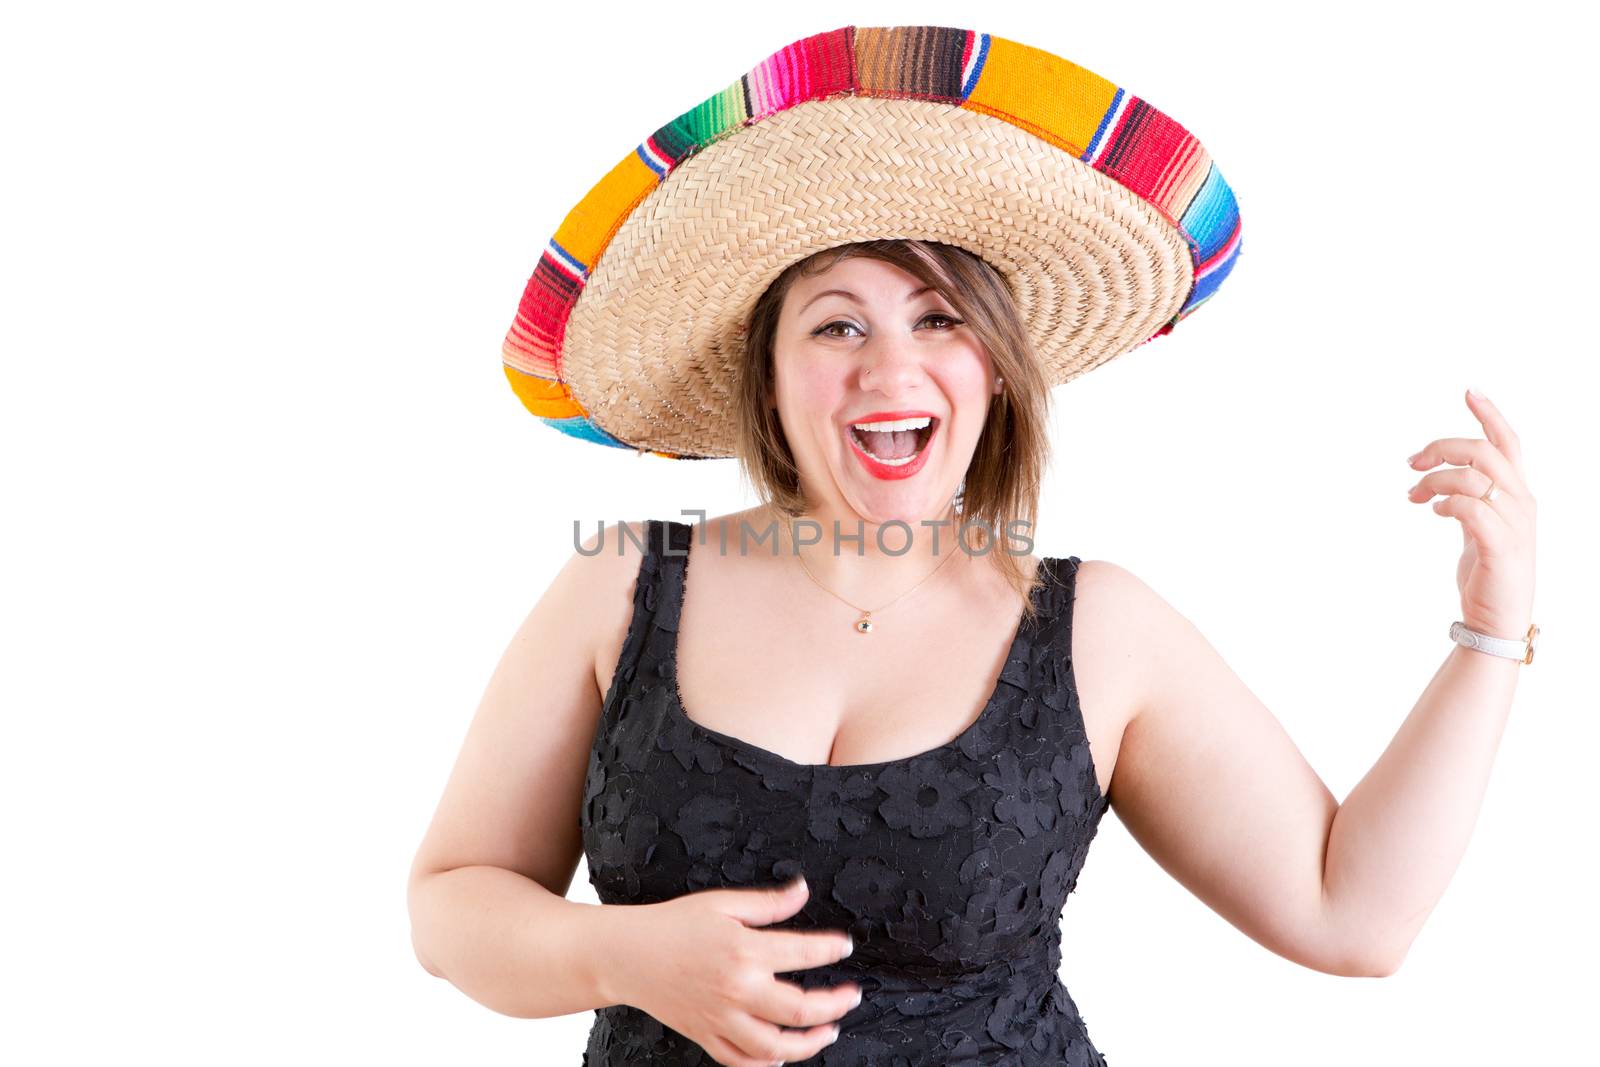 Close up Happy Portrait of a Dancing Lady in Casual Black Shirt with Mexican Sombrero, Looking at the Camera on a White Background.